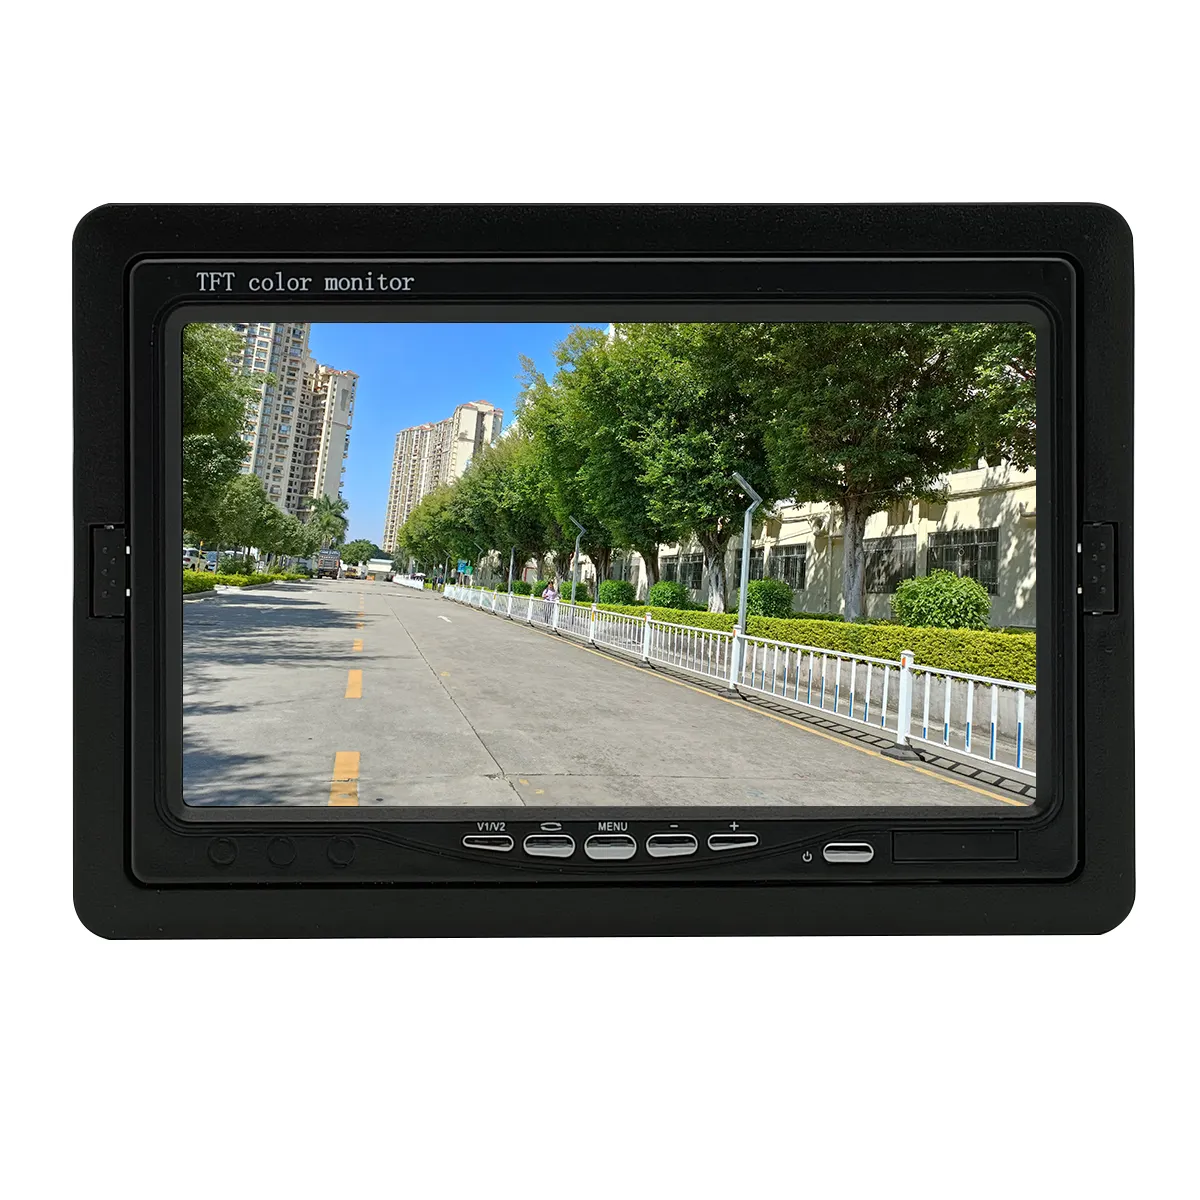 7 Inch High Definition Mini Tv Car Lcd Reverse Rear View Monitor With 2 Av Input